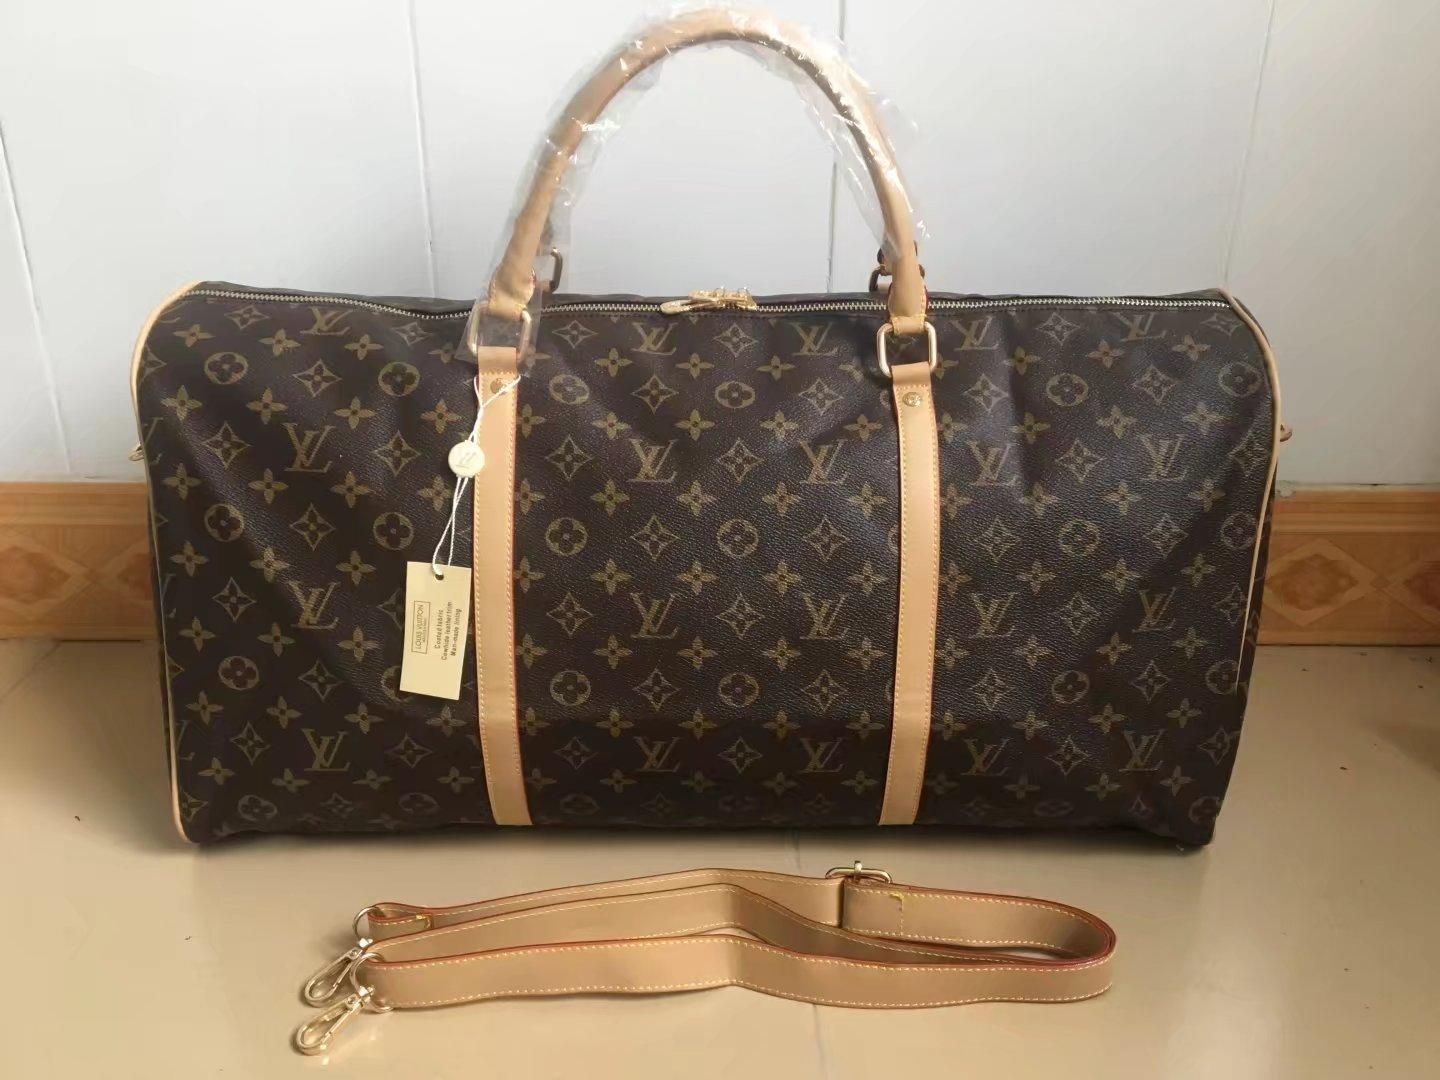 Fashion LuggageBags Women 3AA HandBags MICHAEL V0 KOR Shoulder  TravelBag Luxury Men ToteLOUISVUITTON KEEPALL 55 Cm From  Songwukong, $34.52